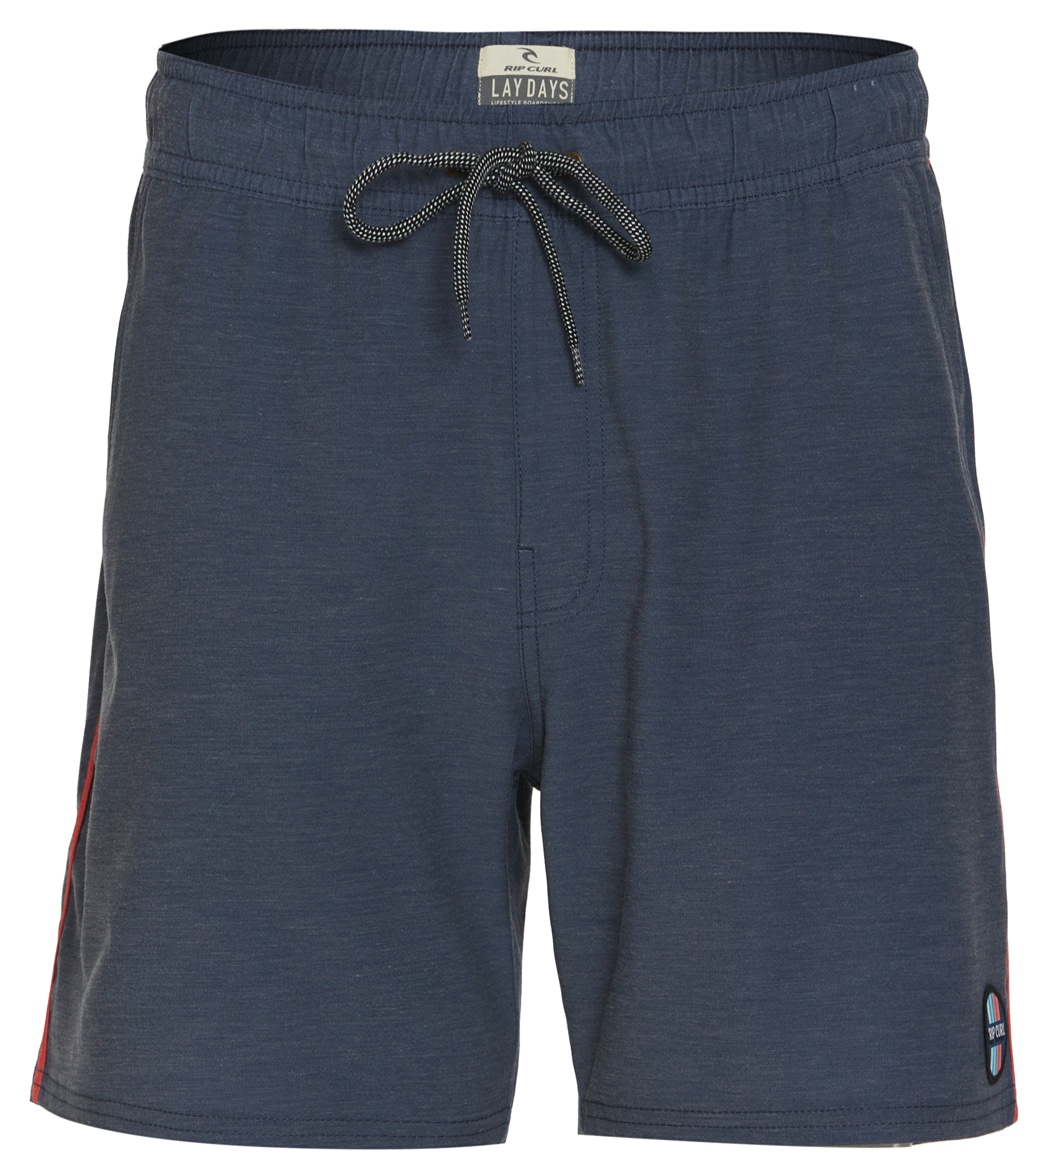 Rip Curl Men's 18 Surf Revival Volley Shorts - Charcoal Navy Large - Swimoutlet.com